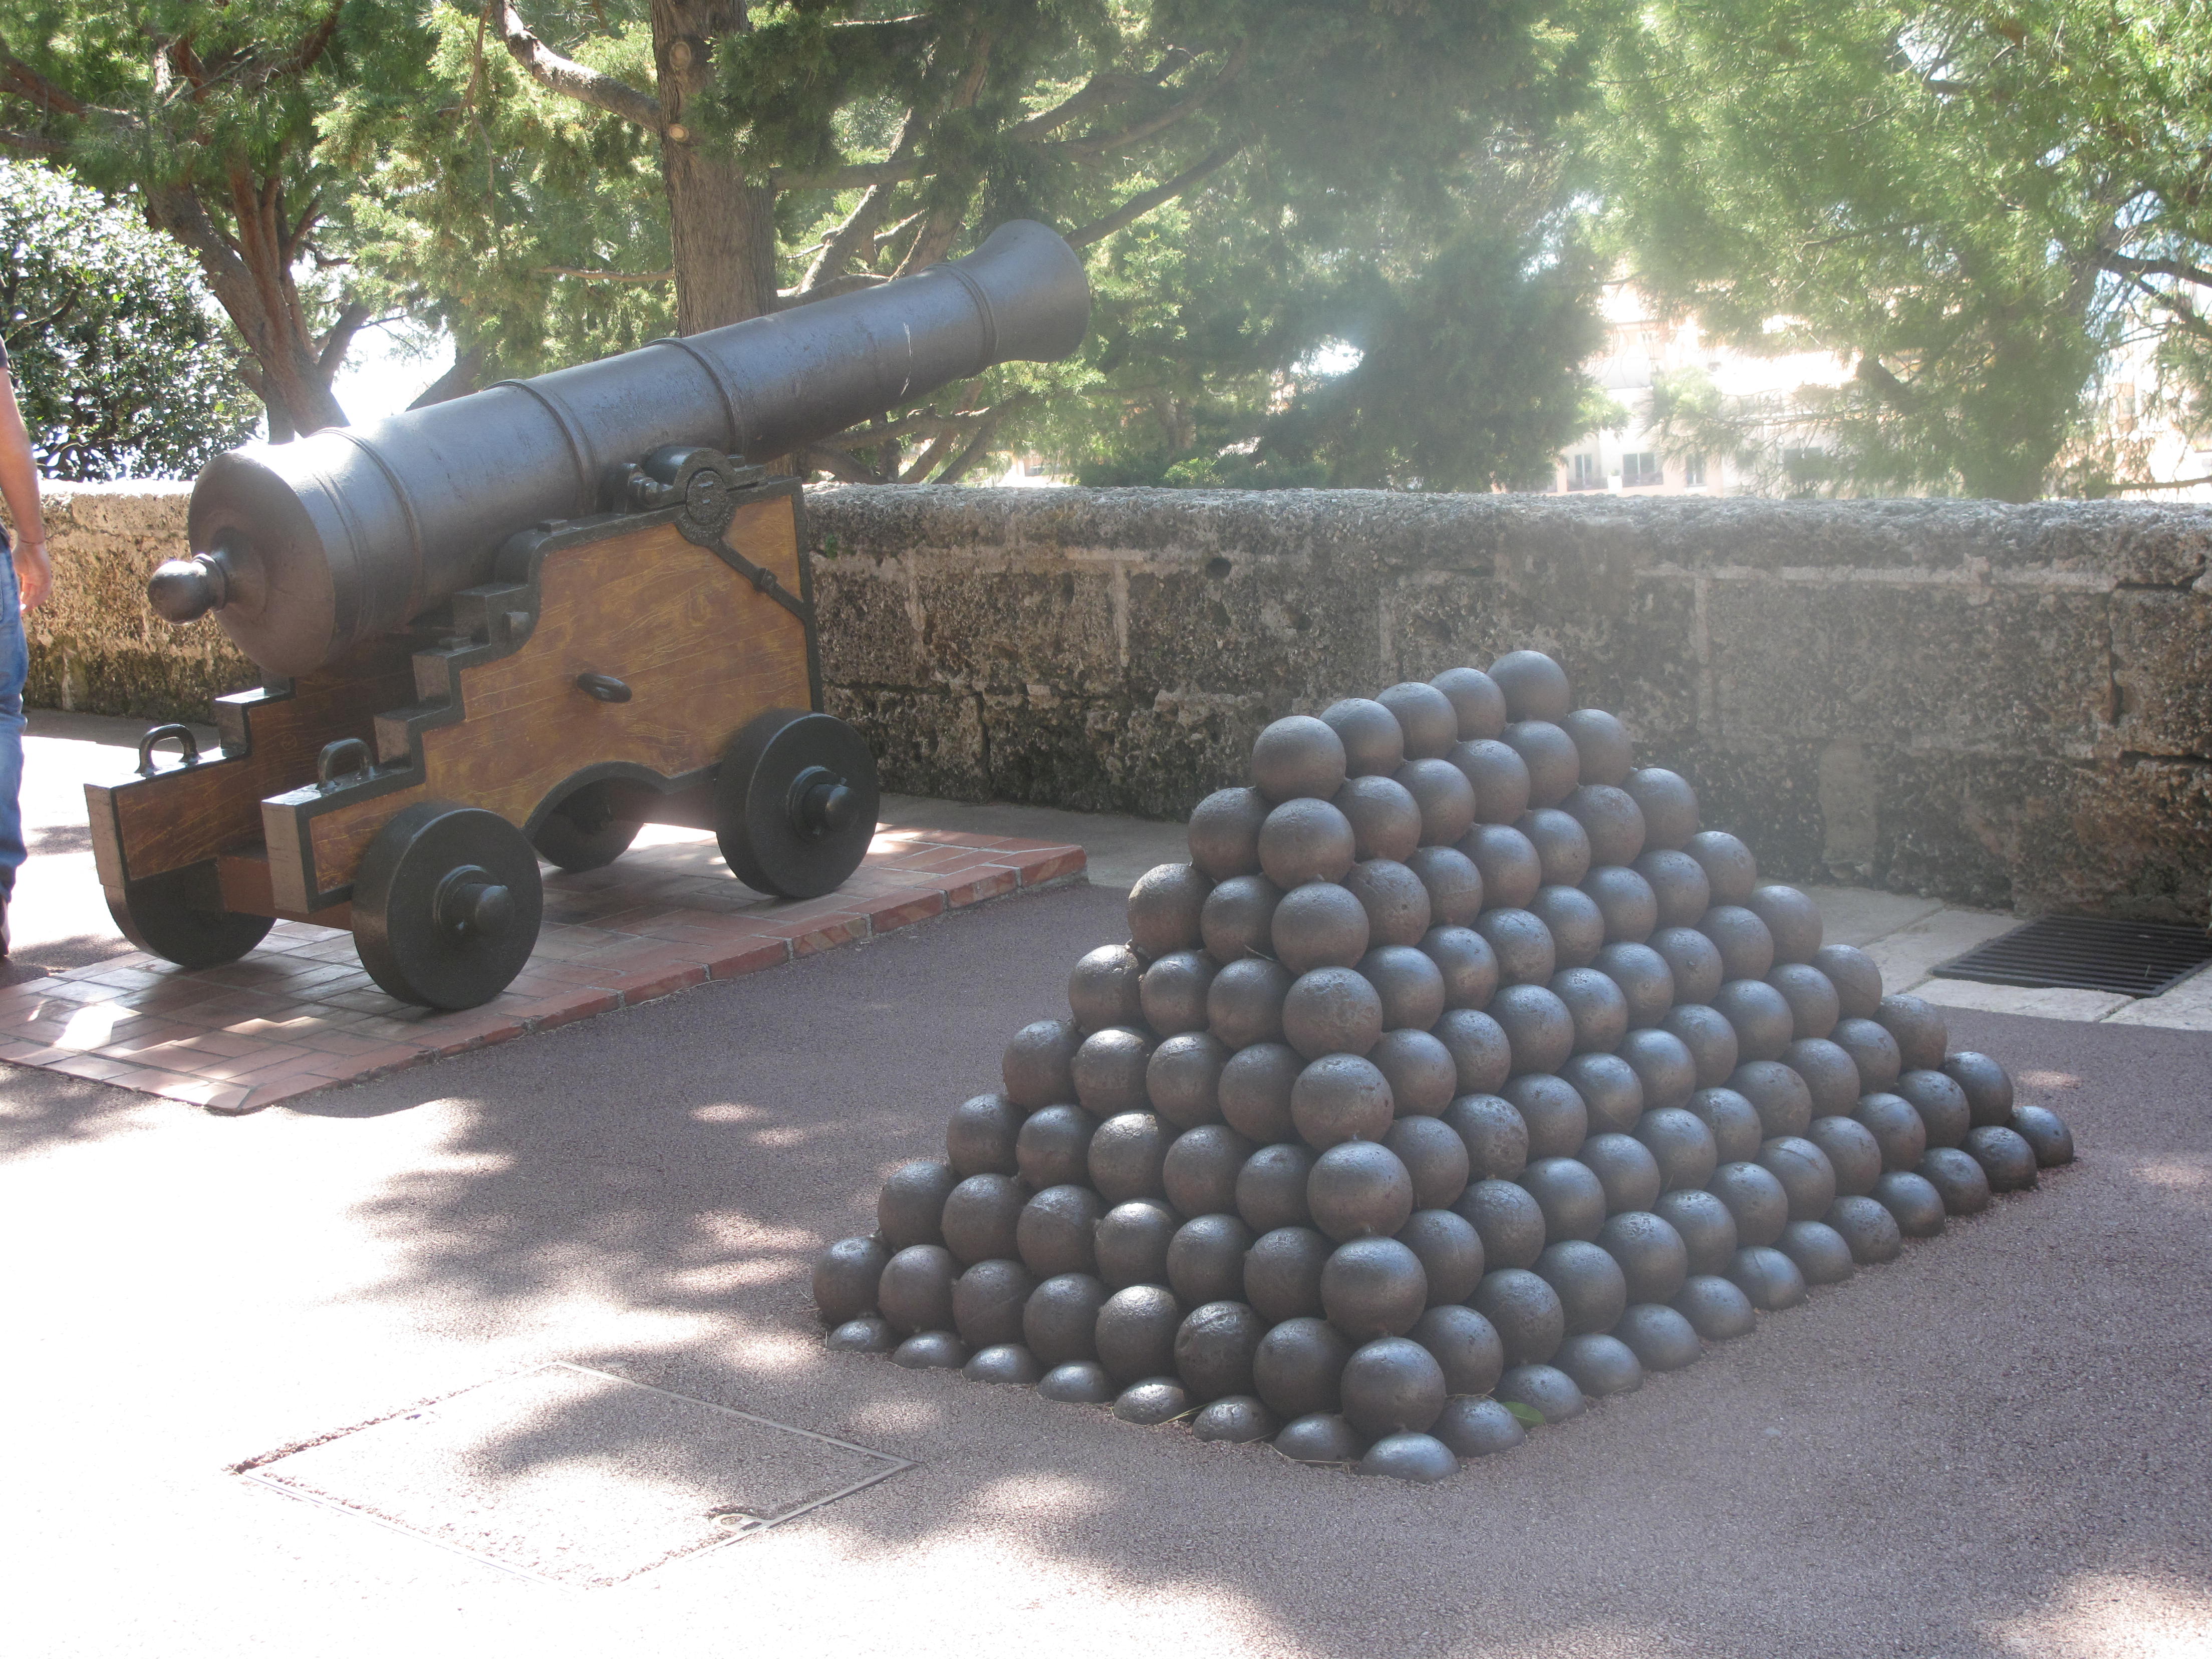 Cannon and Cannonball stacking in Monaco. Image taken by Tangopaso